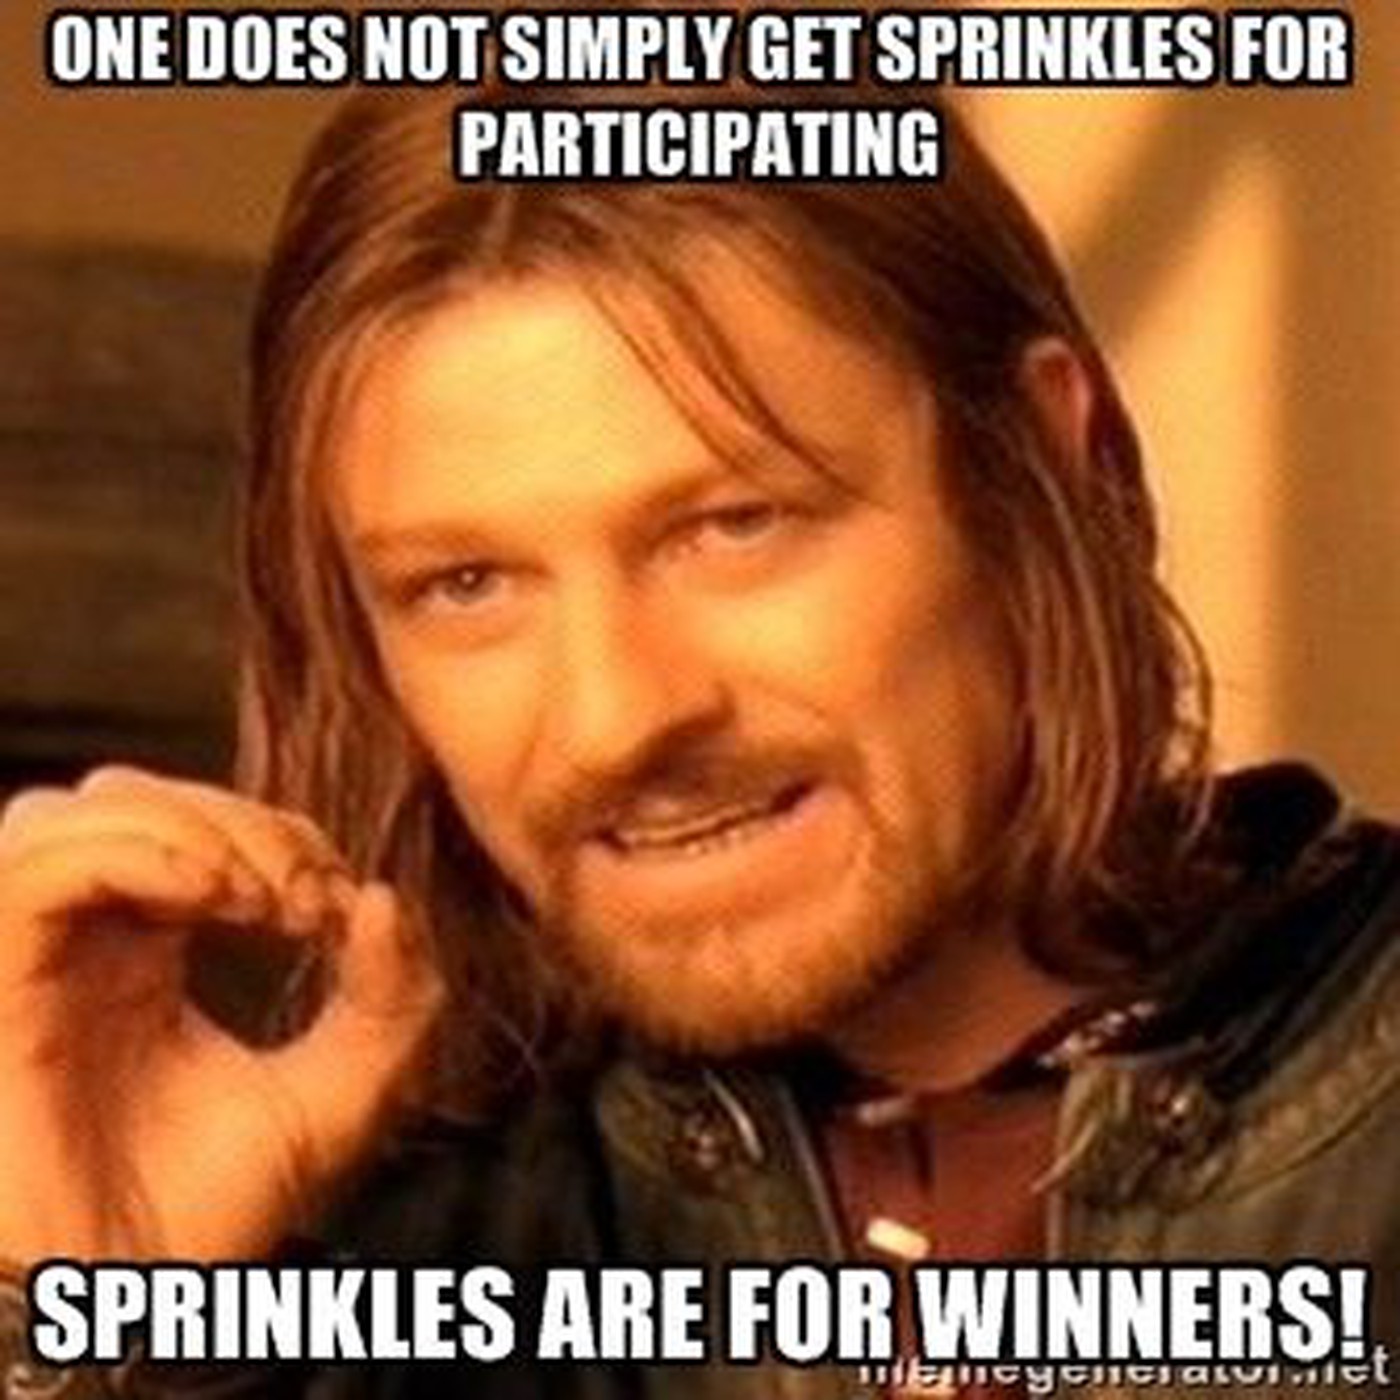 005-The Bet (Sprinkles are for Winners)